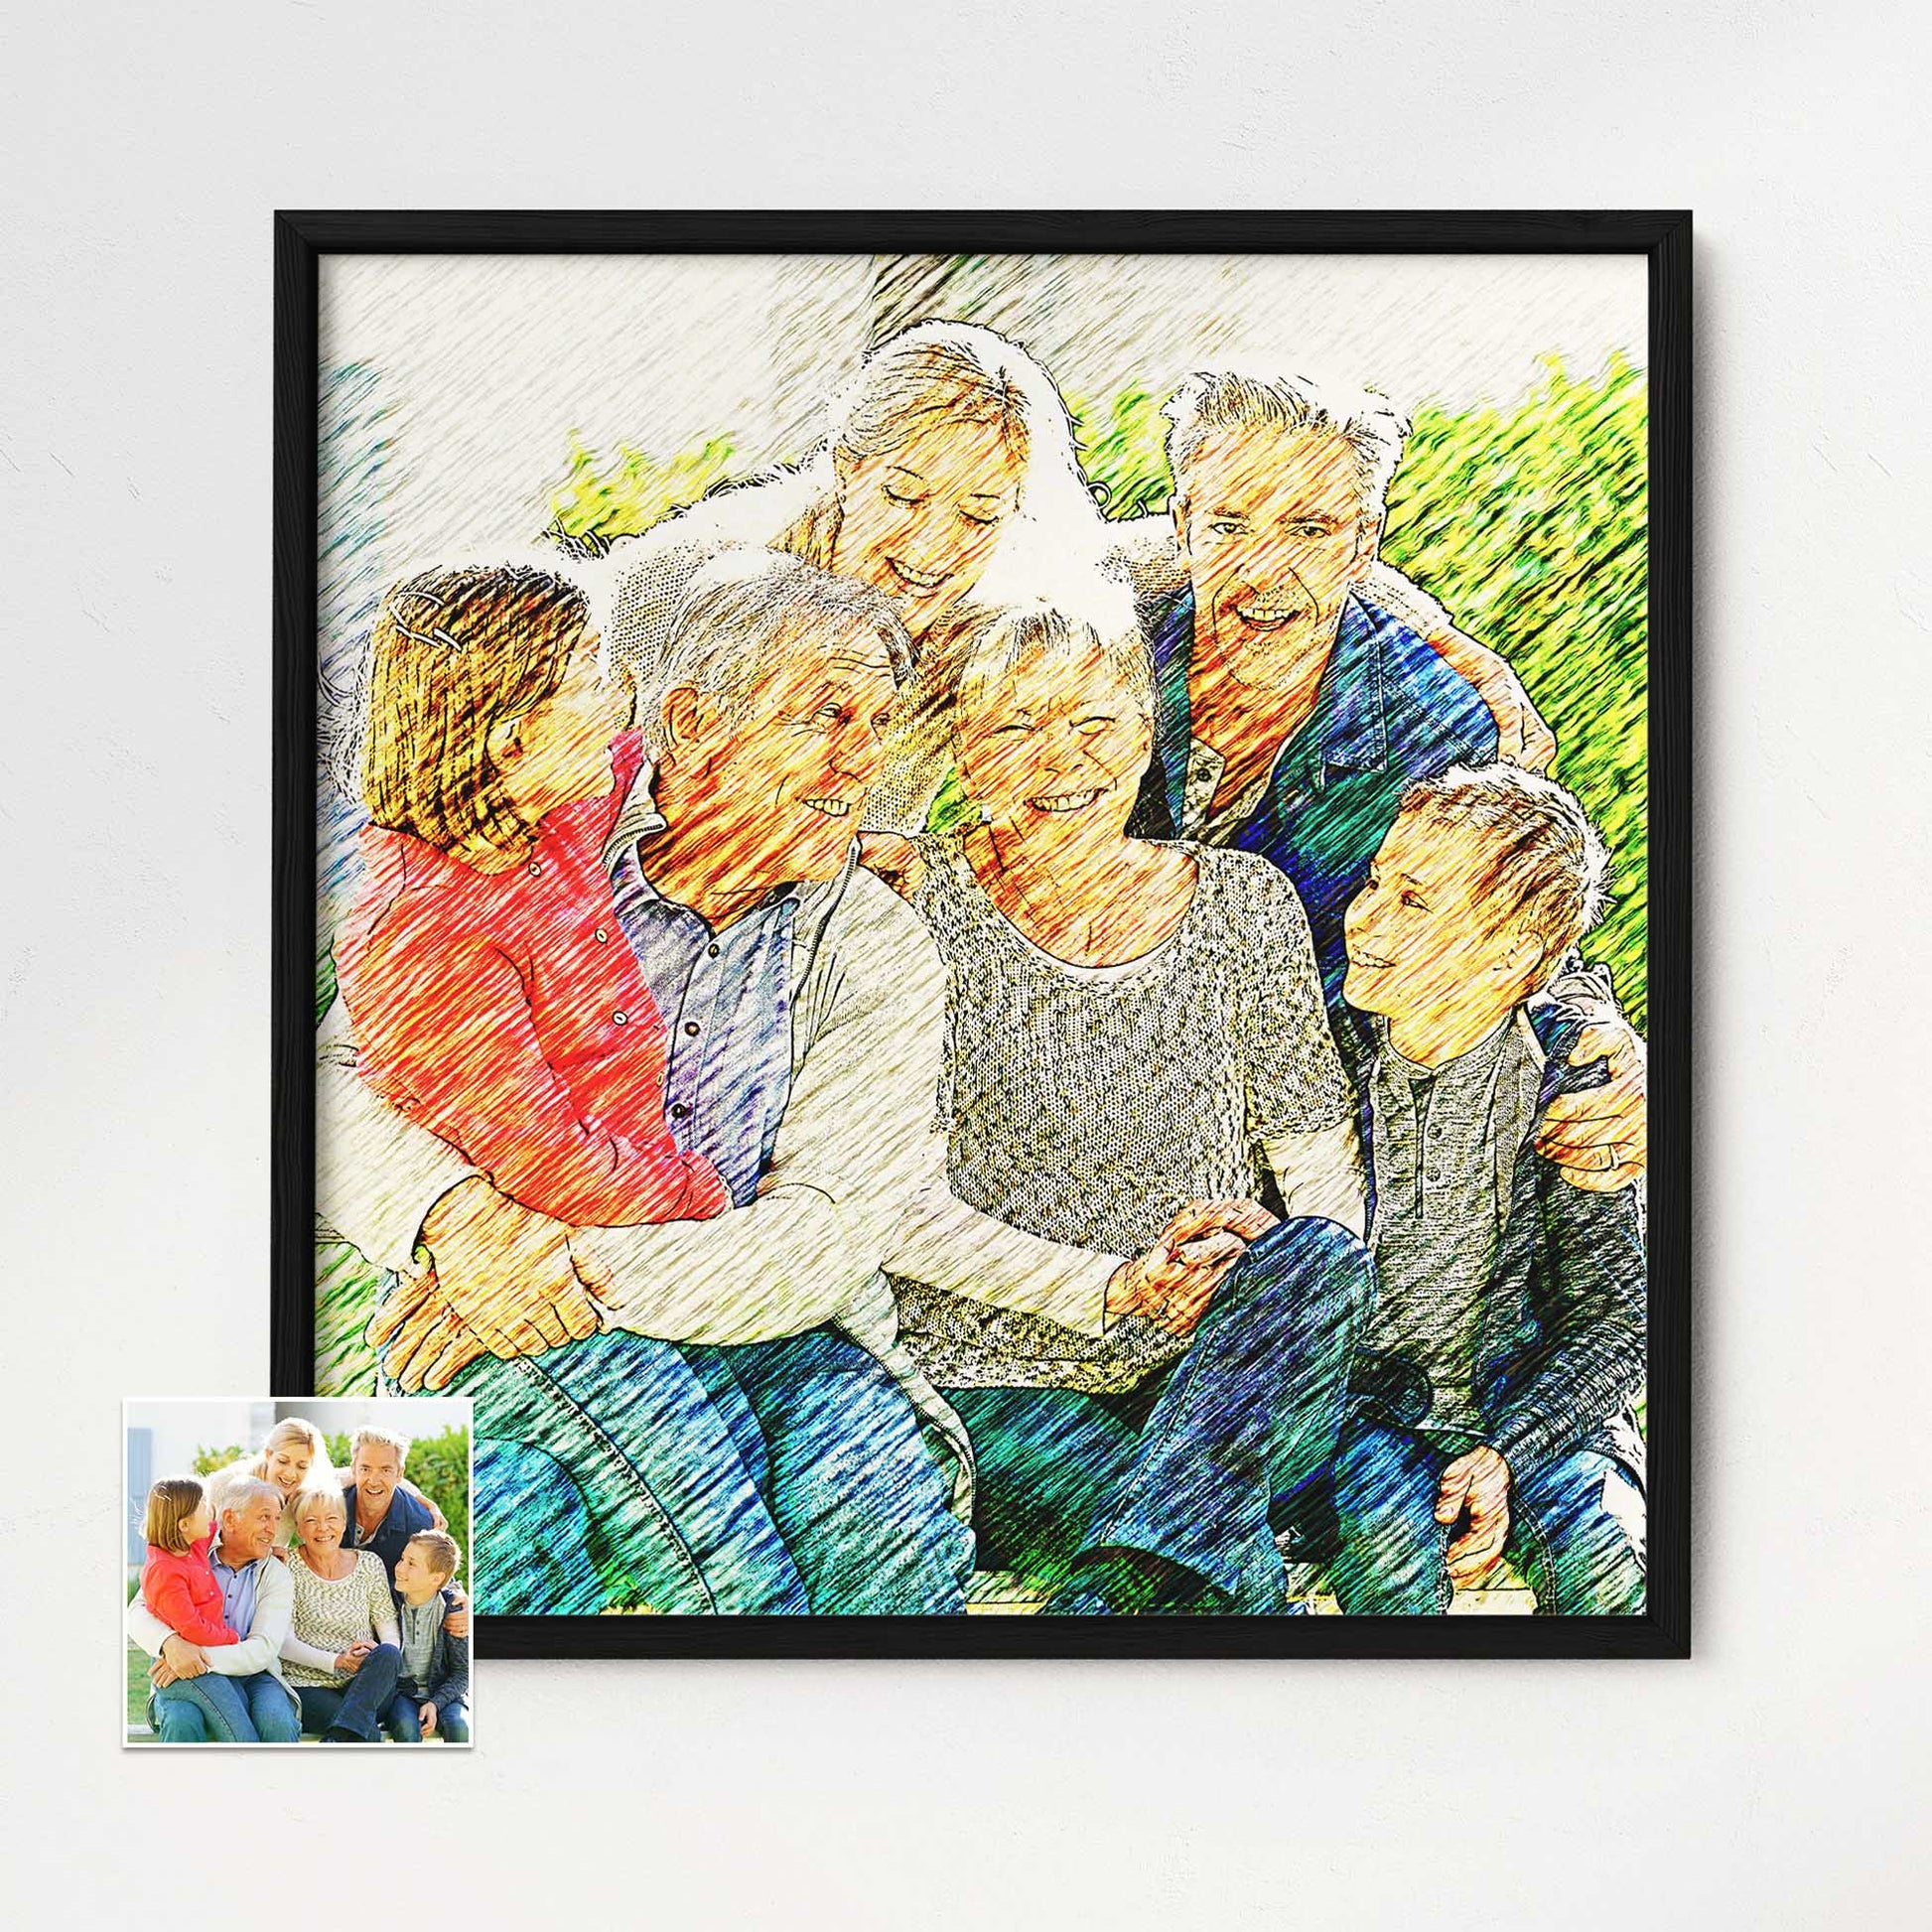 Immerse yourself in the beauty of our Personalised Artsy Illustration Framed Print. Drawing inspiration from your photo, this artwork is printed on museum-quality paper, capturing the essence of fine art. Encased in a natural wood frame